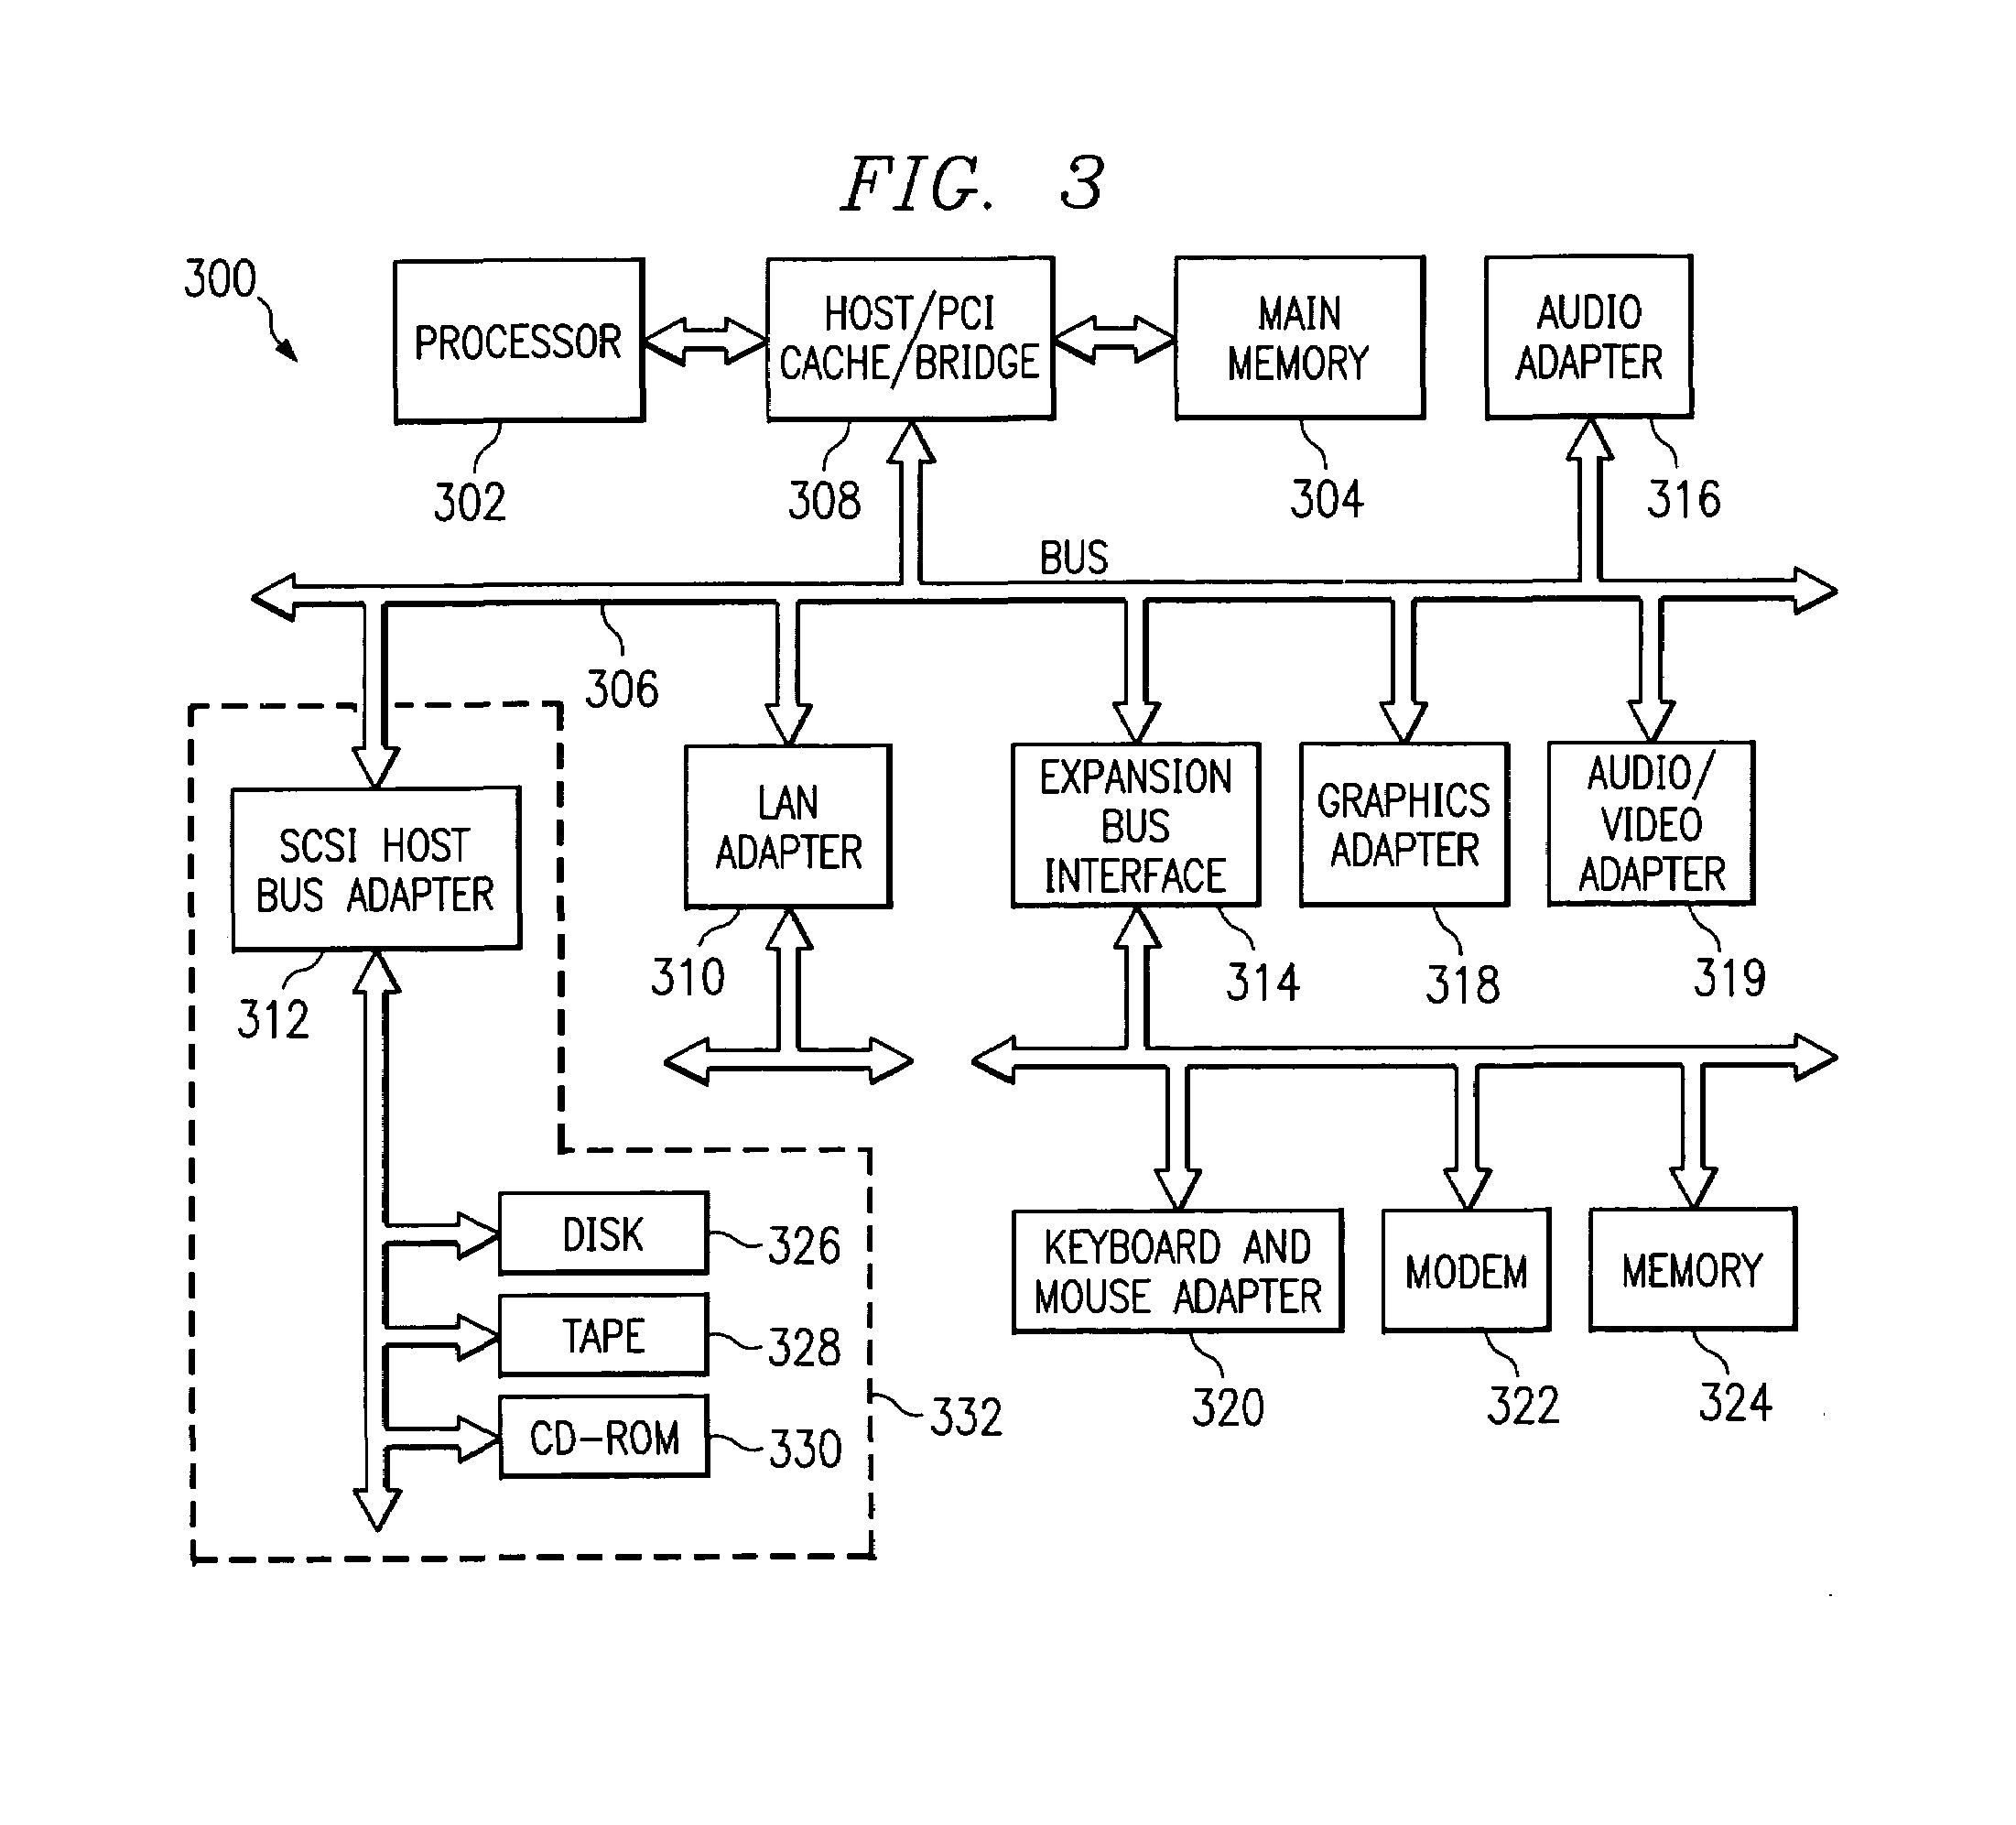 Method and apparatus for the detection, notification, and elimination of certain computer viruses on a network using a promiscuous system as bait